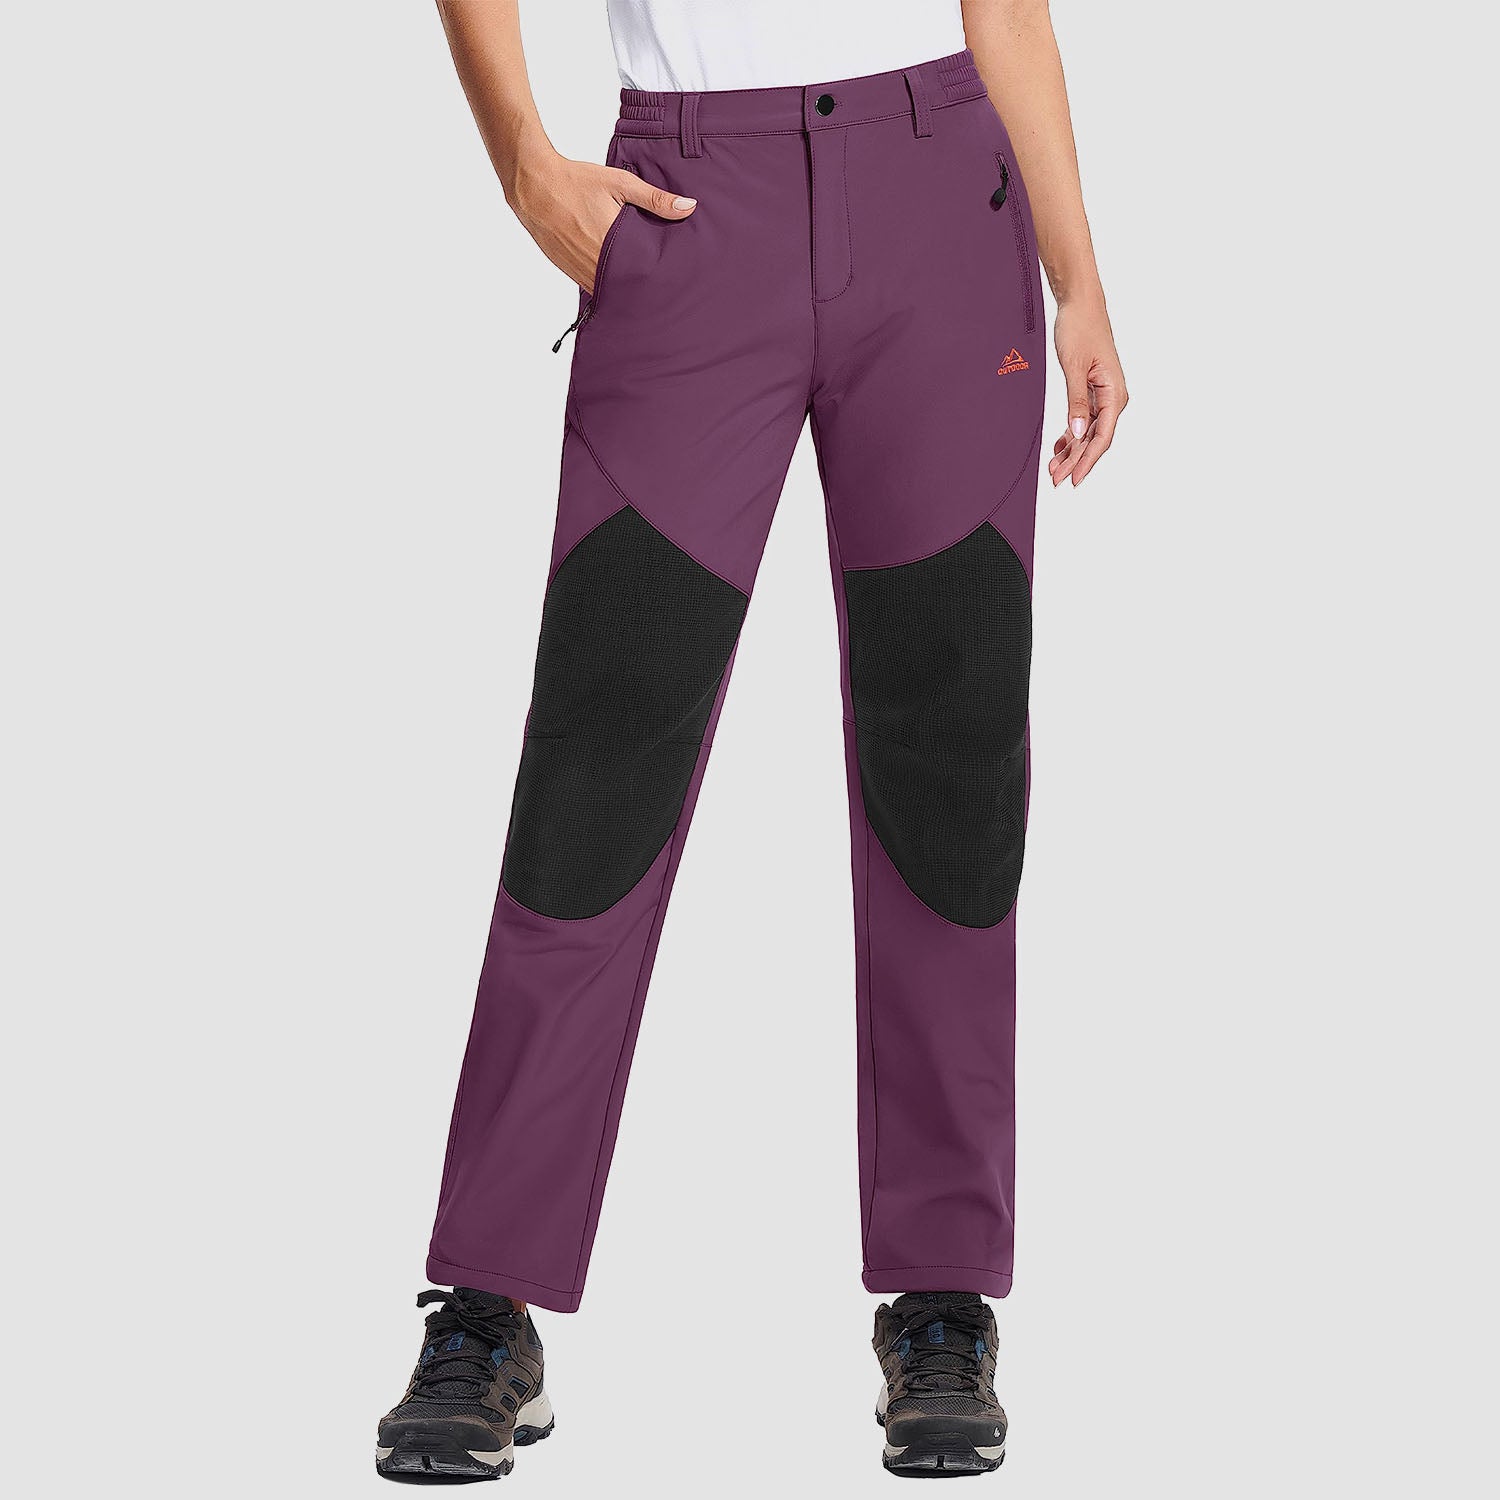 Women's Hiking Pants Fleece Lined Warm Pant with Articulated Knee Water Resistant Softshell Outdoor Snow Ski, Purple / 2XL